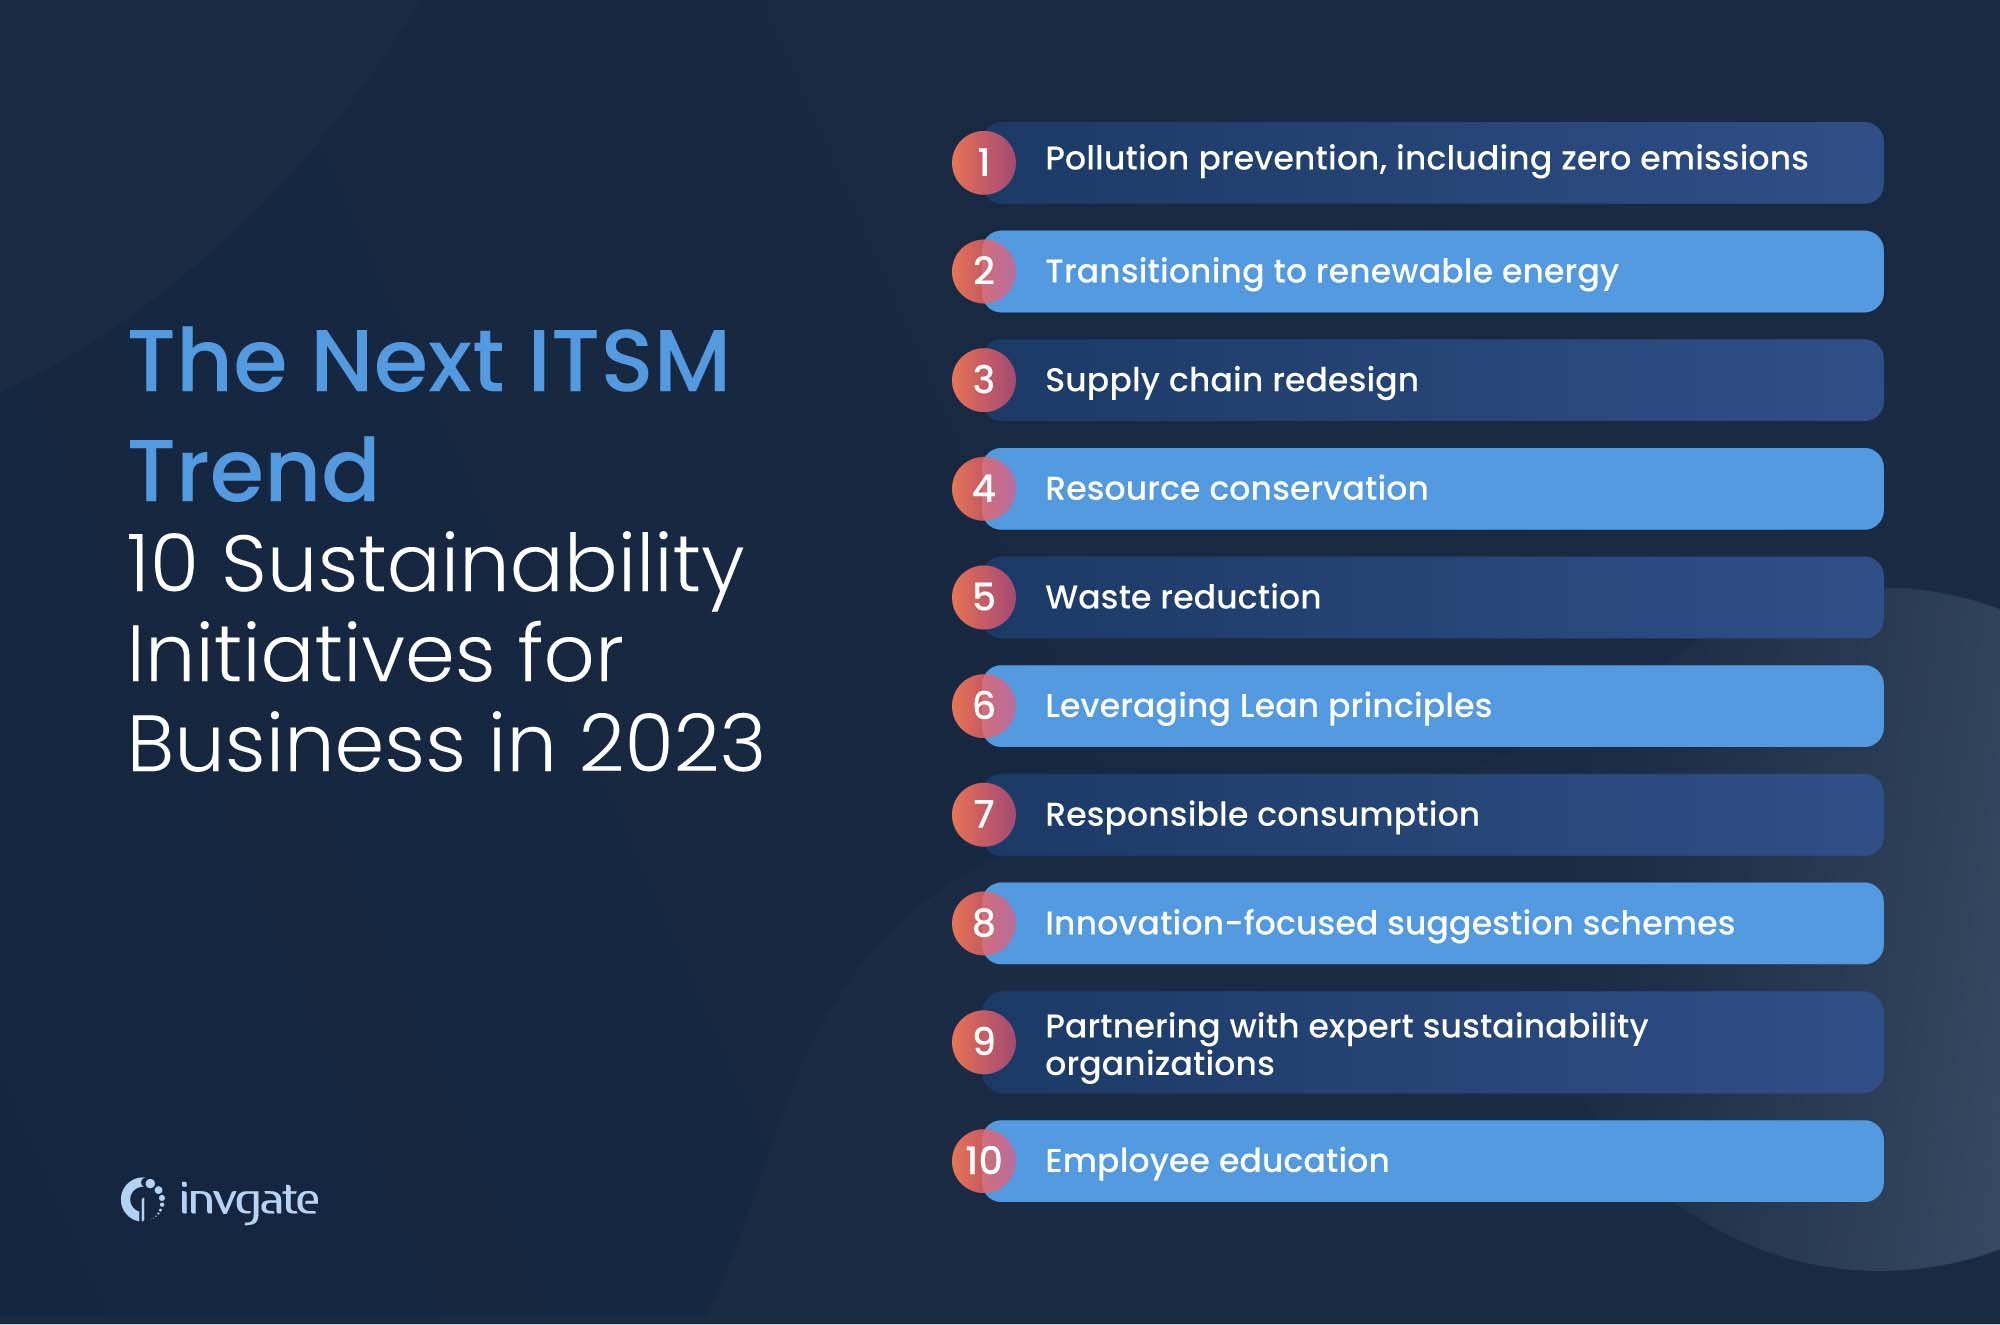 List of 10 sustainability initiatives for business in 2023.